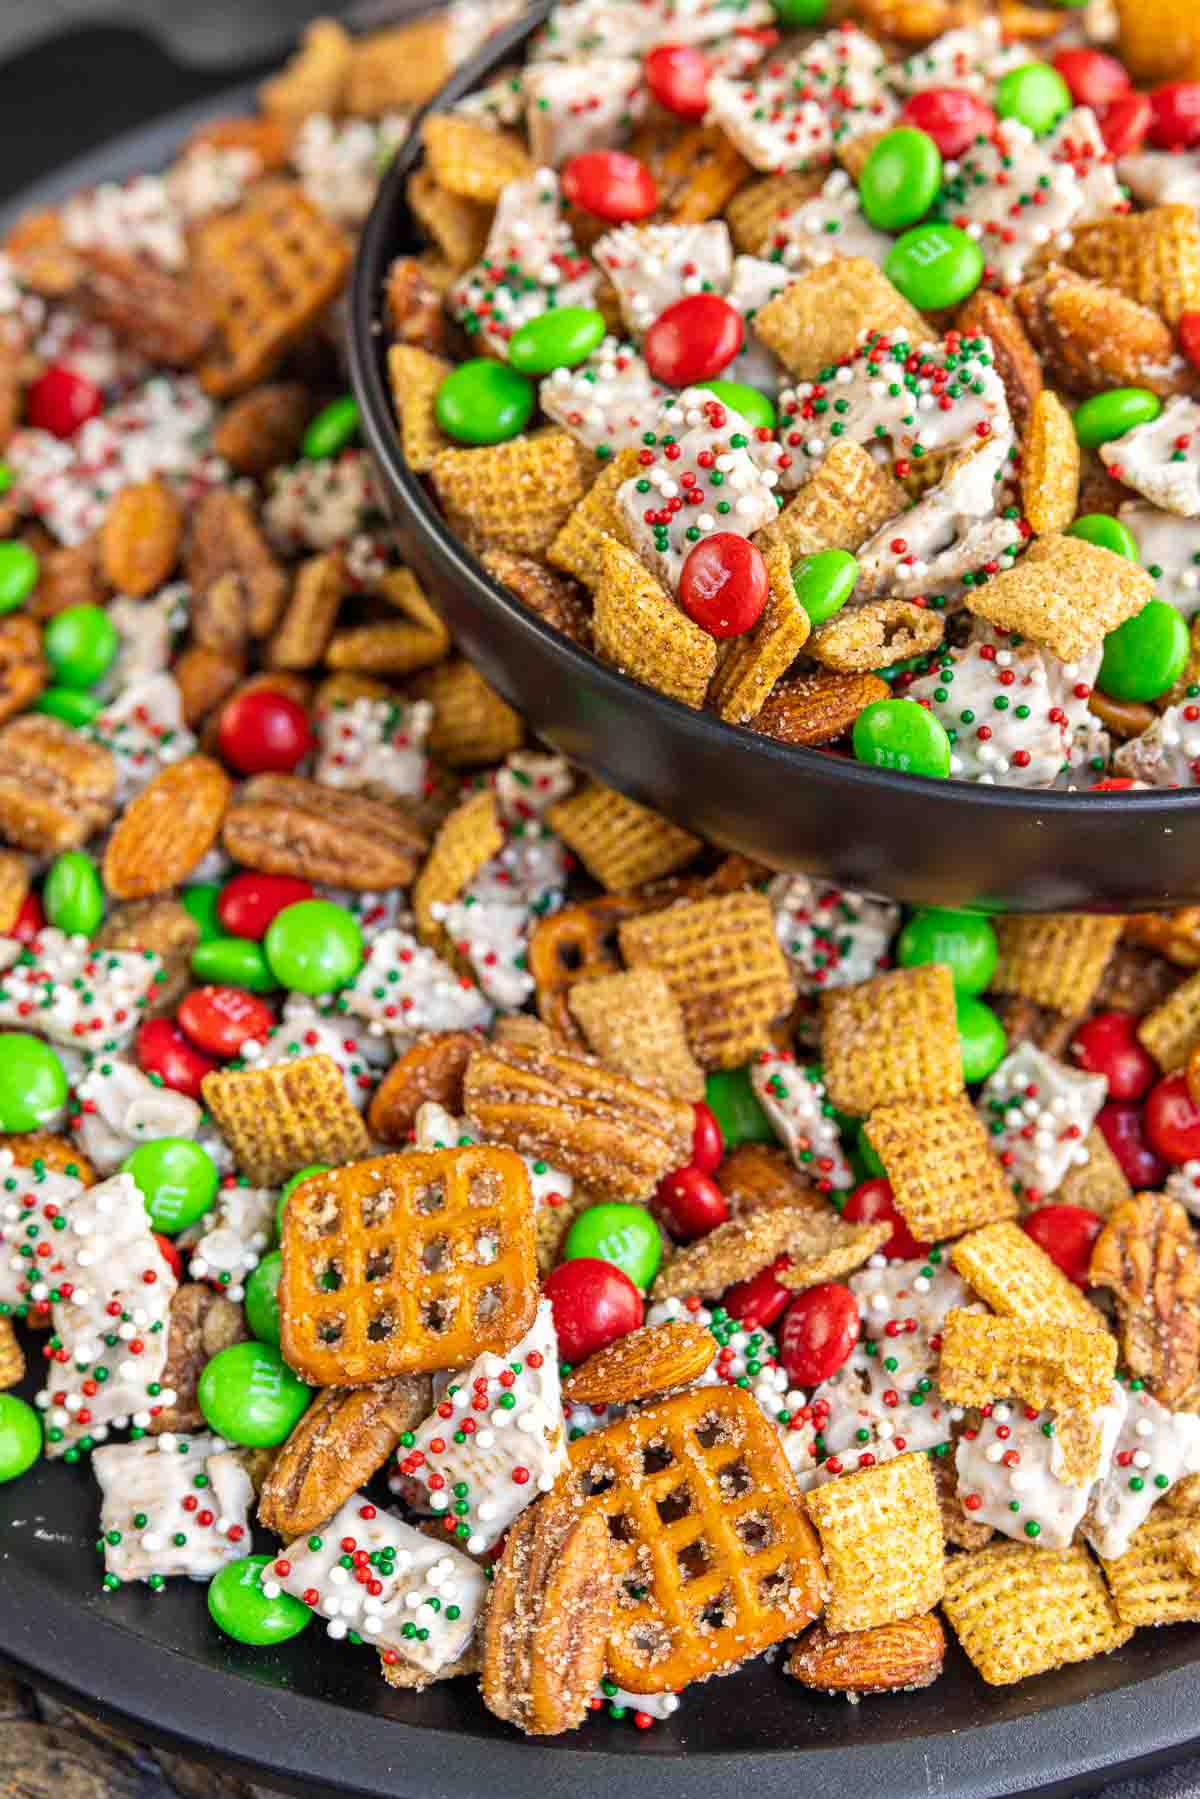 Pretzels, cinnamon sugar chex mix and white chocolate chex cereal tossed with M&Ms